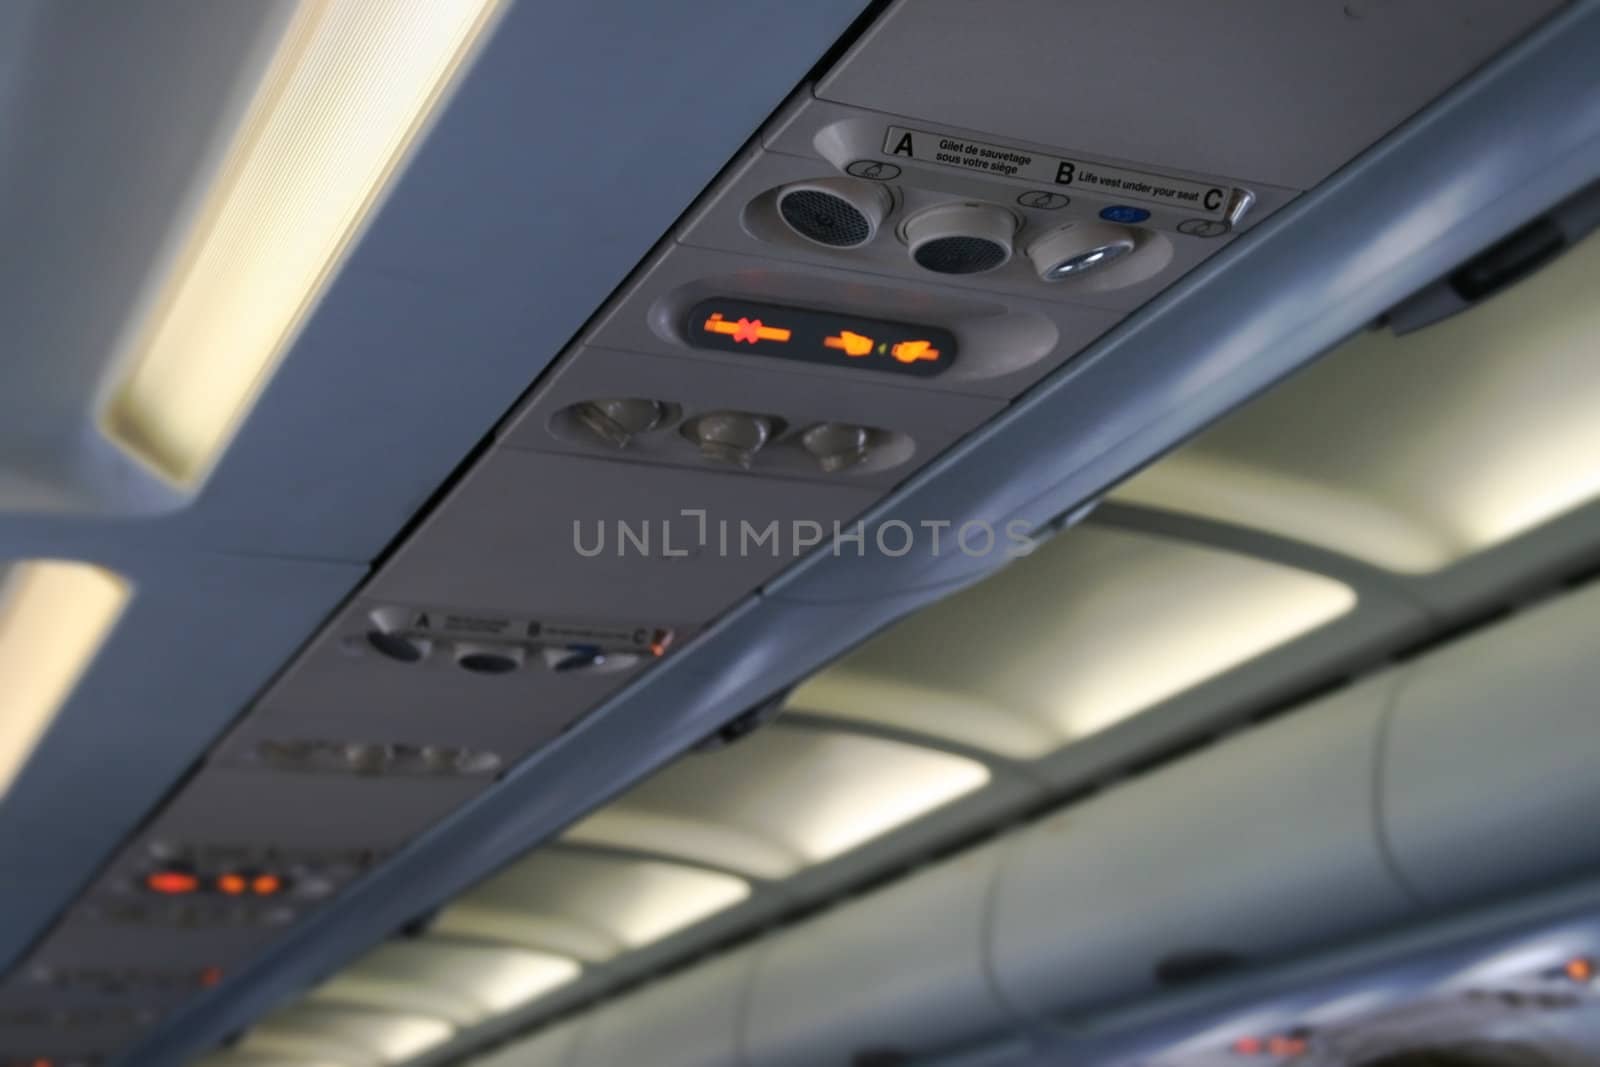 Airplane cabin ceiling by daboost